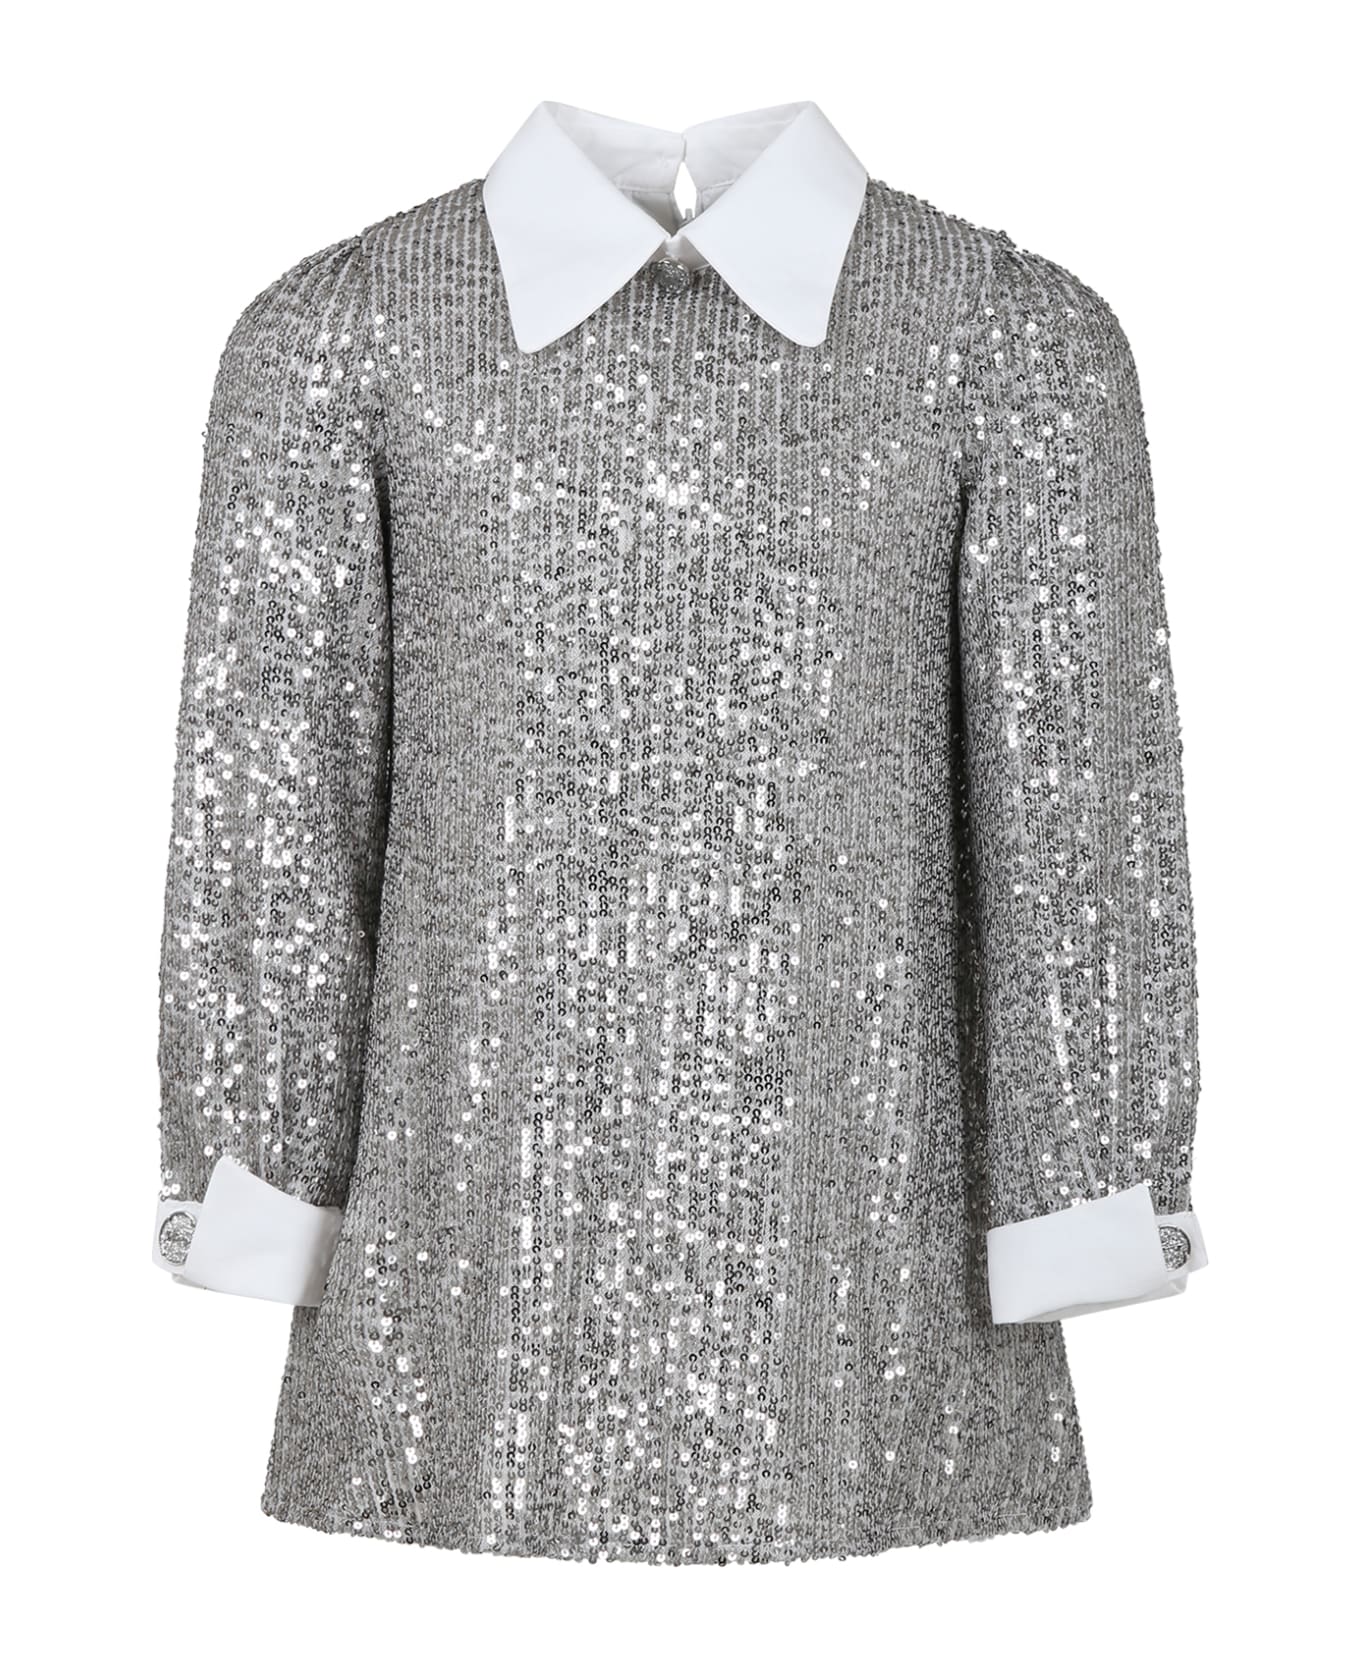 Genny Silver Dress For Girl With Sequins - Silver